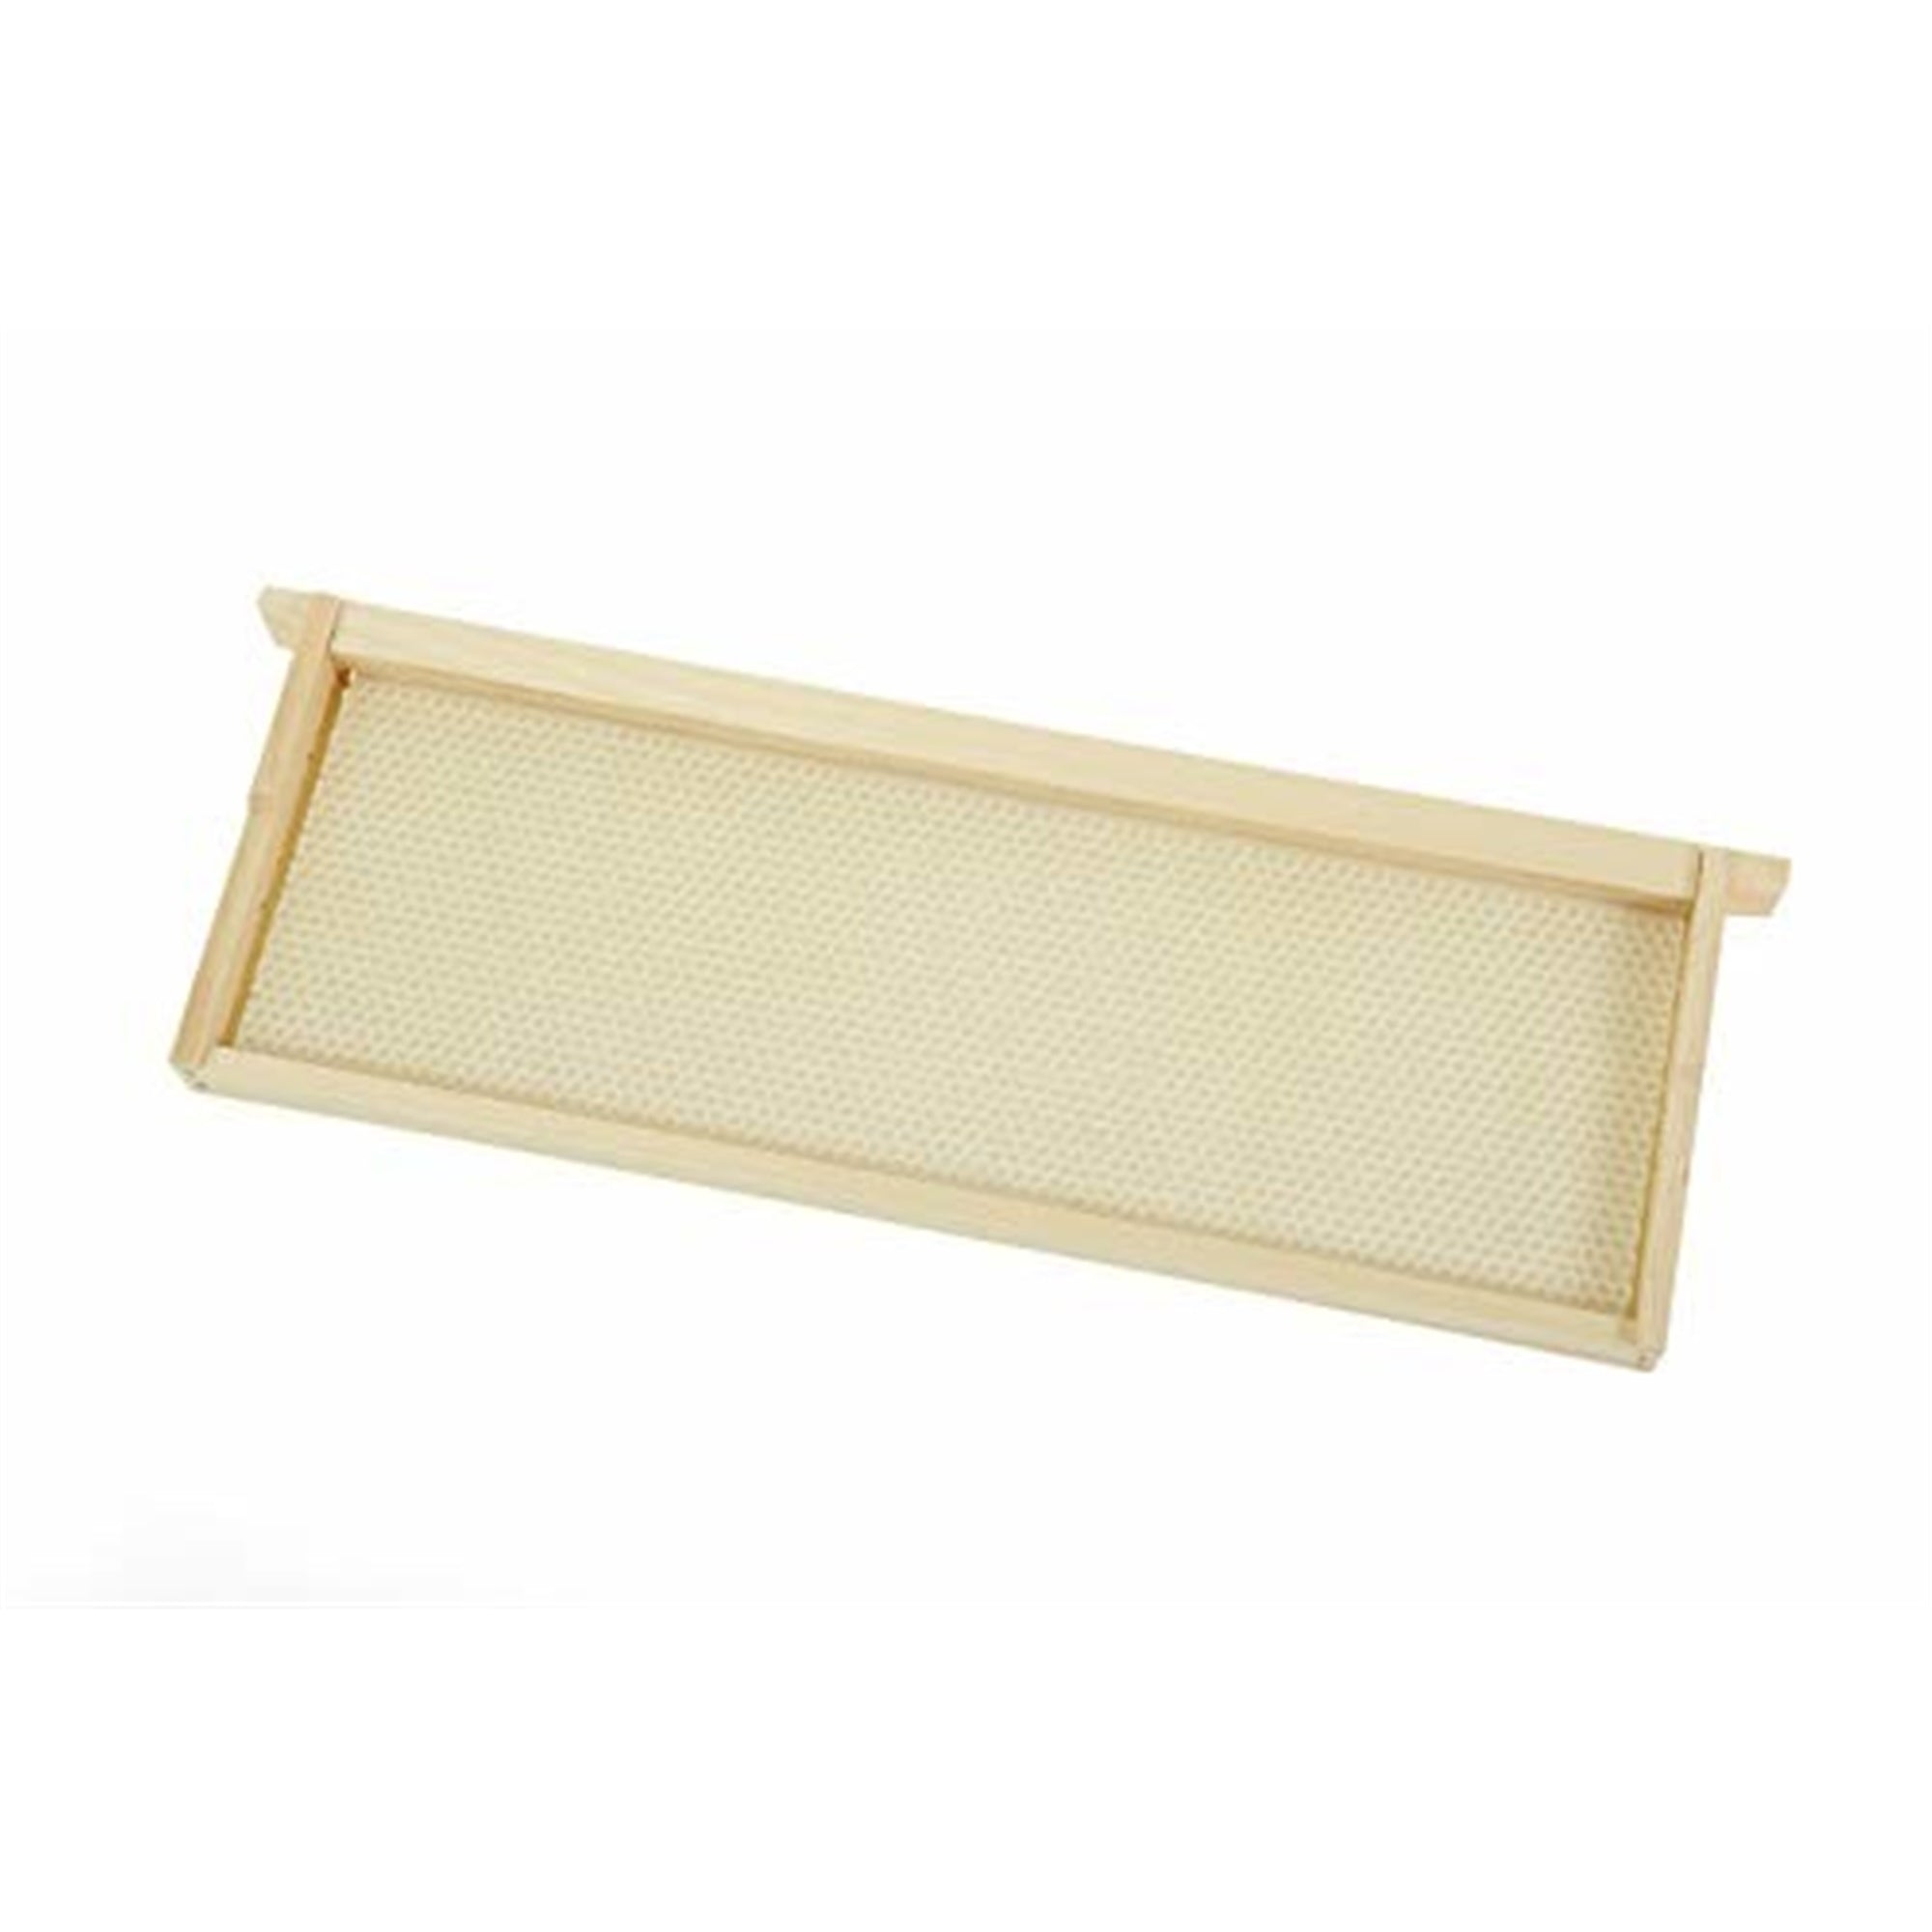 Little Giant Wooden, Wax-Coated Plastic Foundation, Bee Hive Frames, Medium (5 Pack)